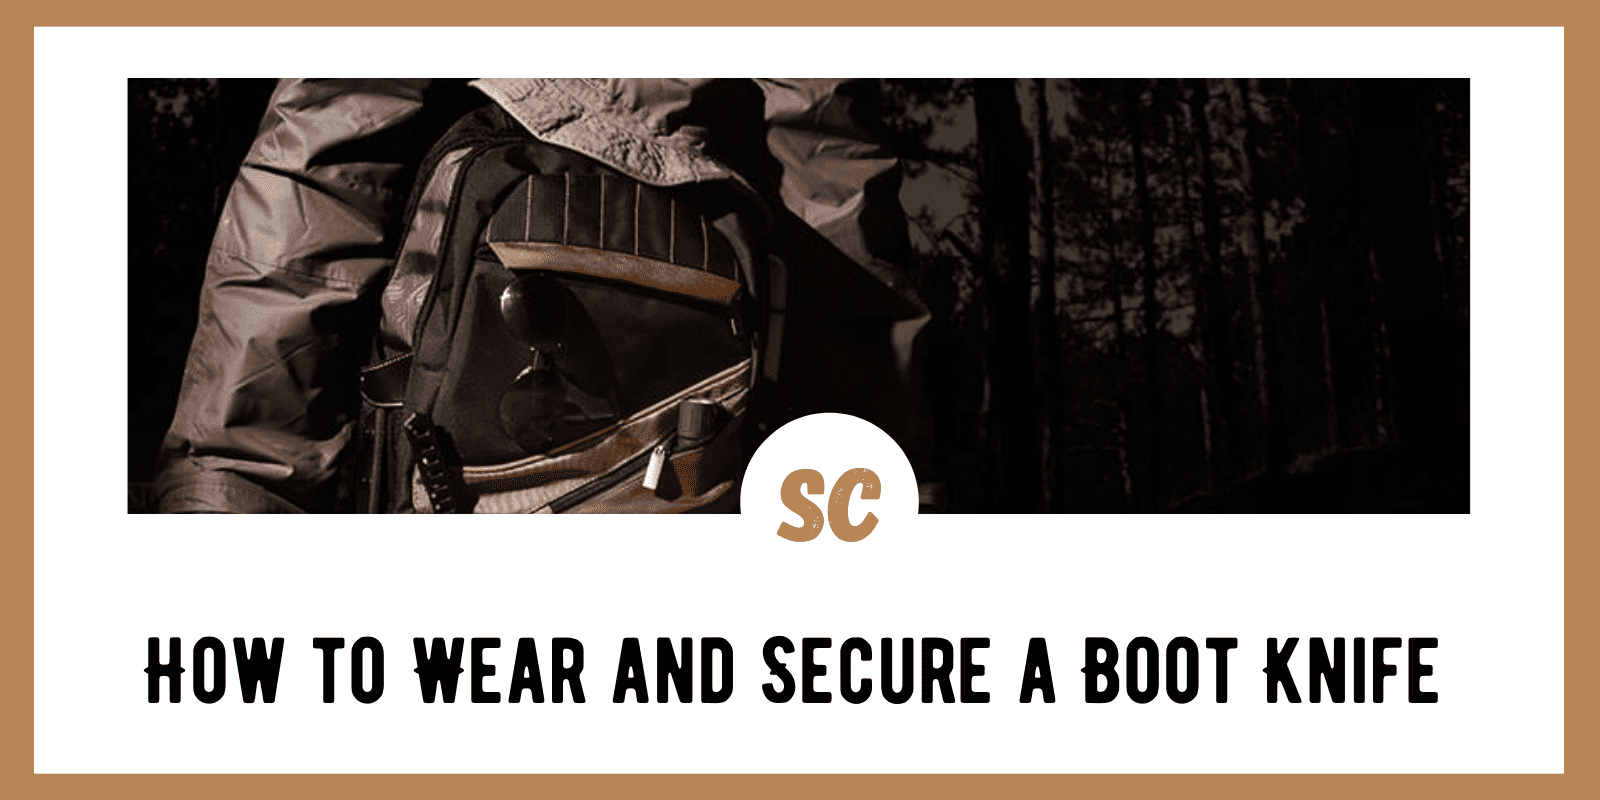 How to Wear and Secure a Boot Knife